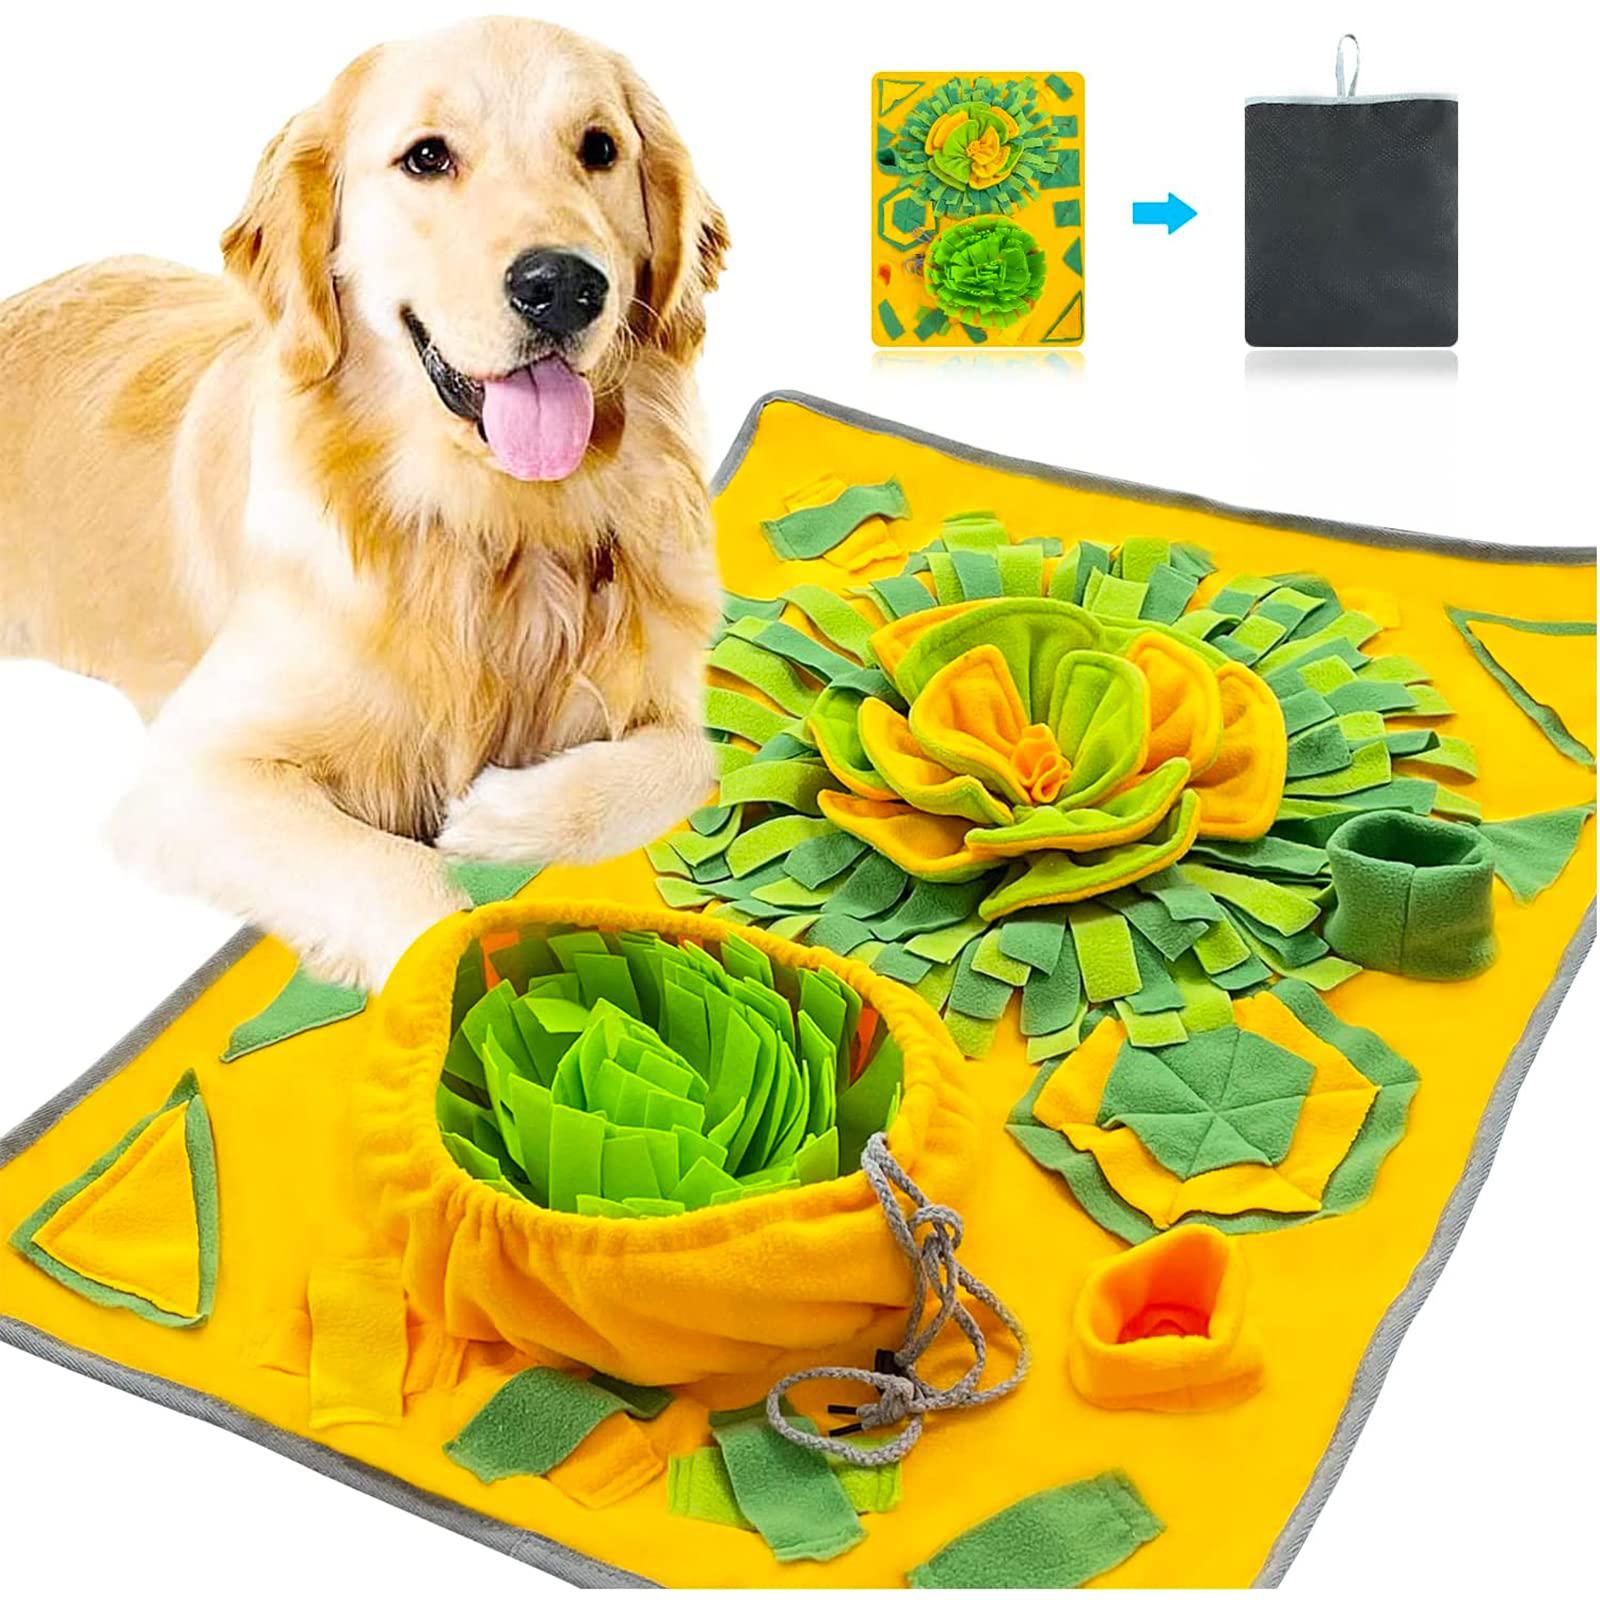 notherss dog snuffle mat, feeding mat for large dogs, 31.5inch